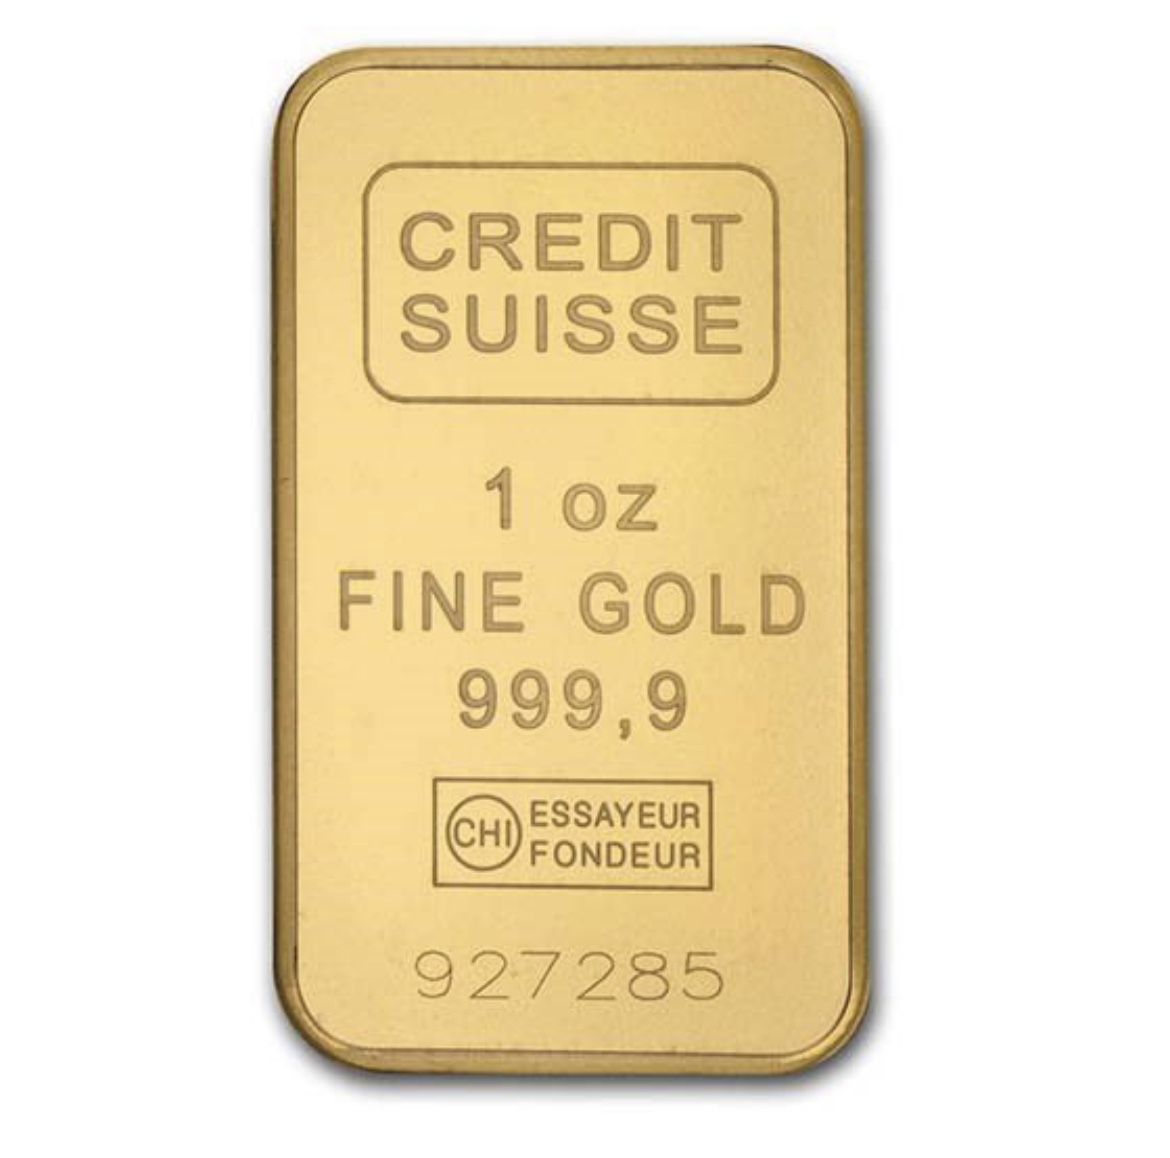 1oz. Fine Gold Bars - Collectables